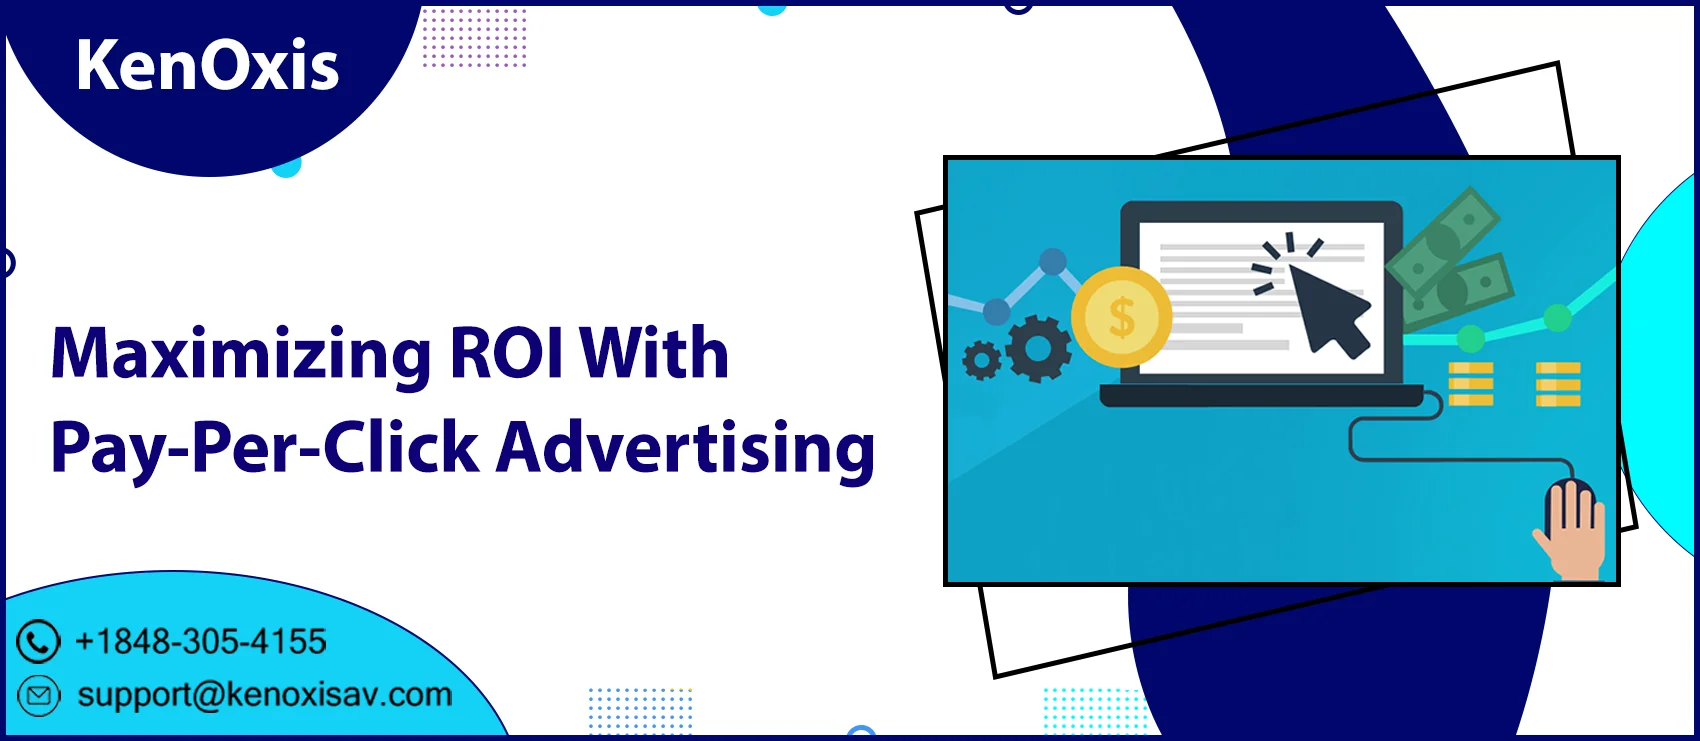 Maximizing ROI With Pay-Per-Click Advertising